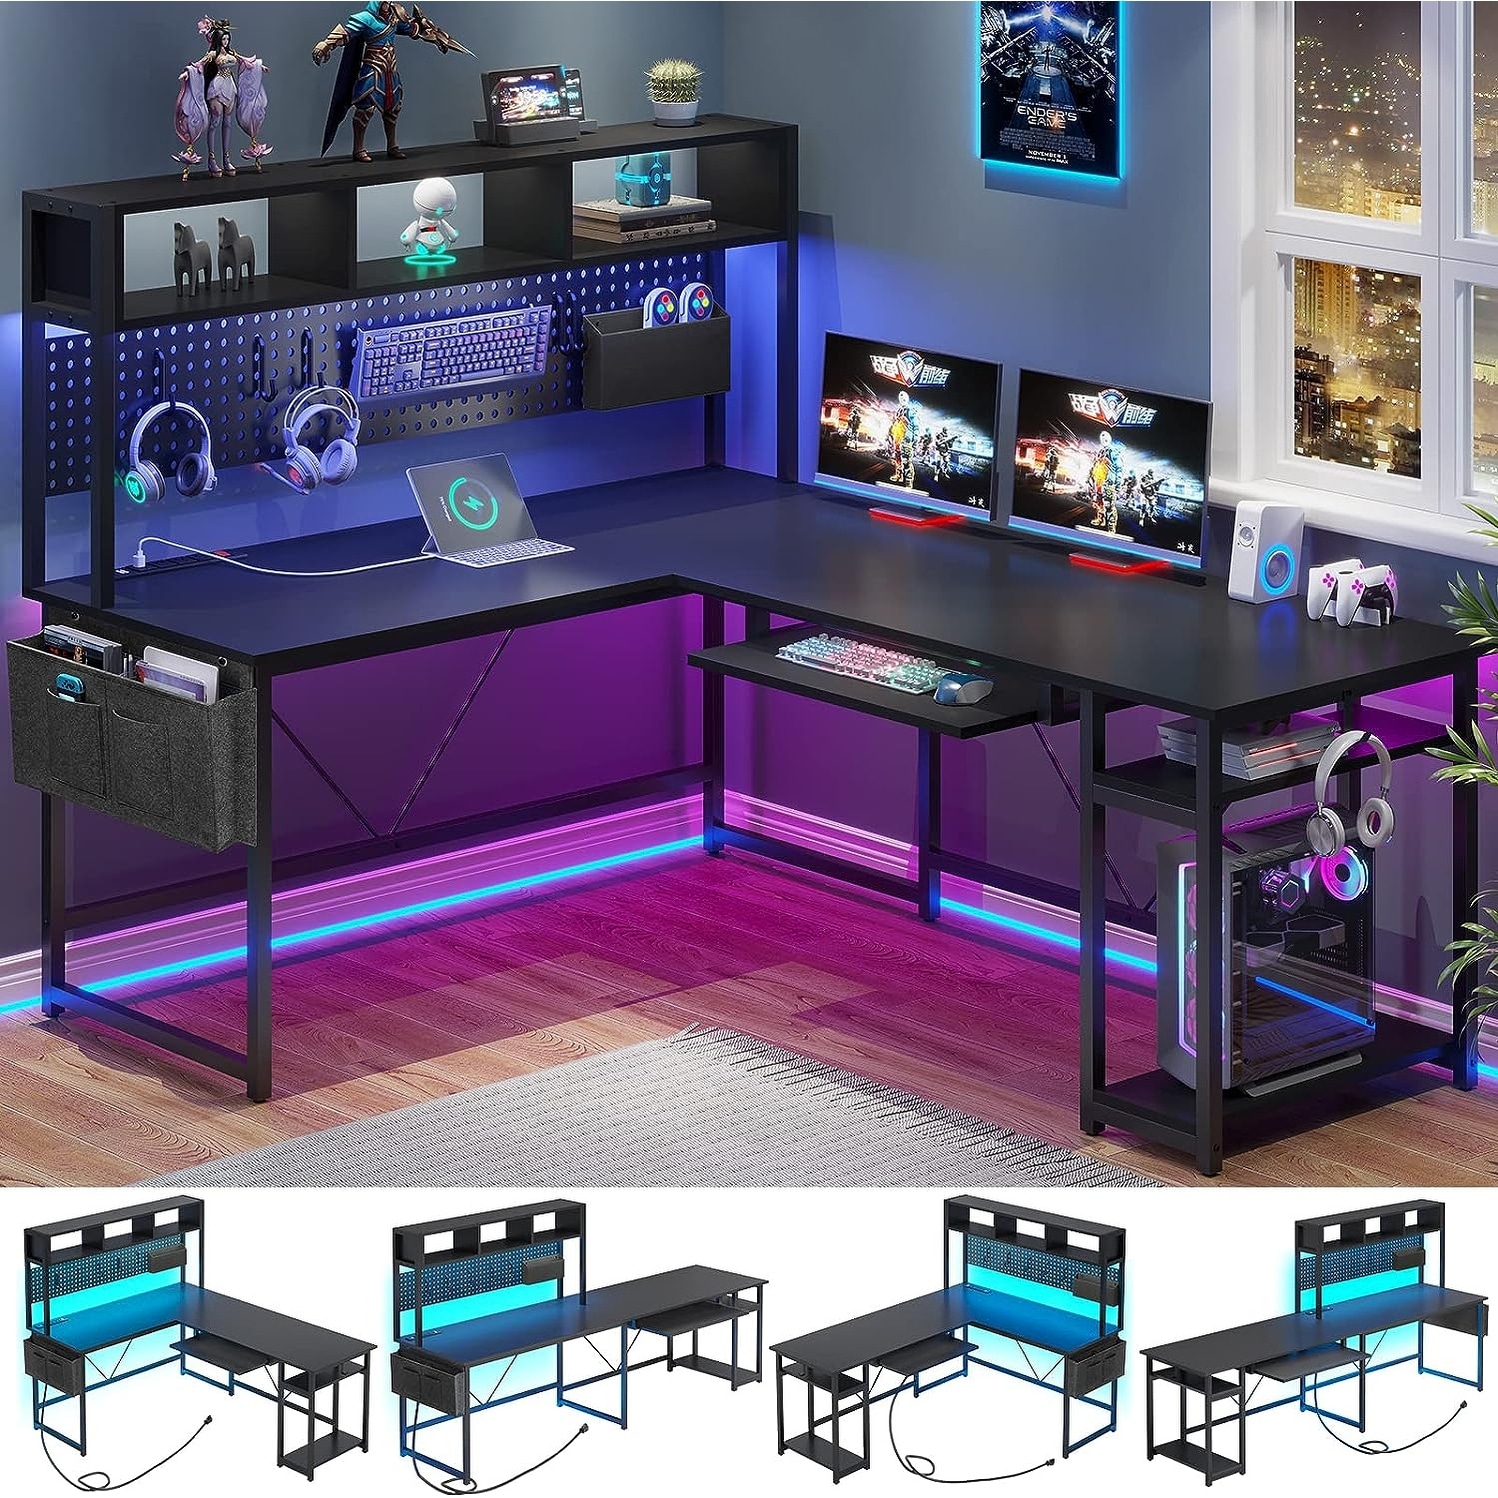 79 Gaming Desk, Computer Desk with 2 Fabric Drawers & LED Light